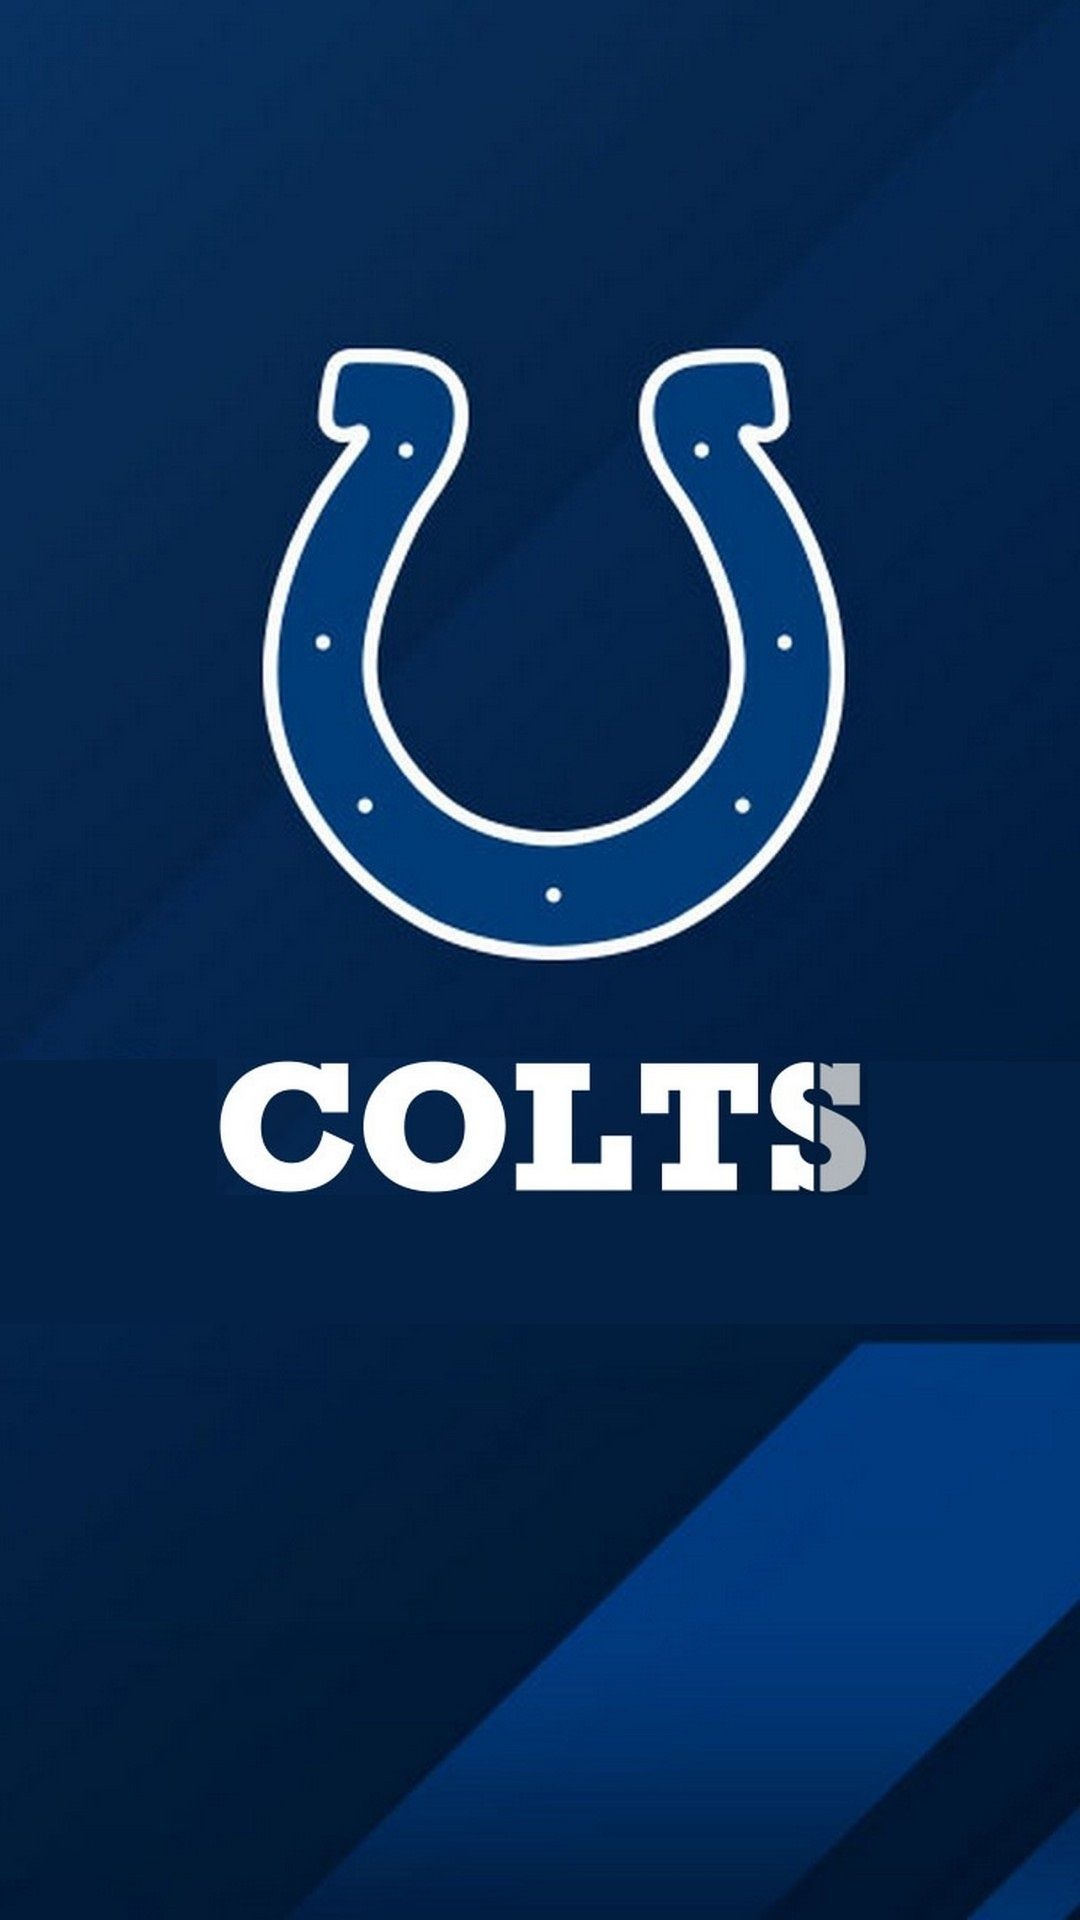 Indianapolis Colts, NFL football, Colts logo, Sports, 1080x1920 Full HD Phone